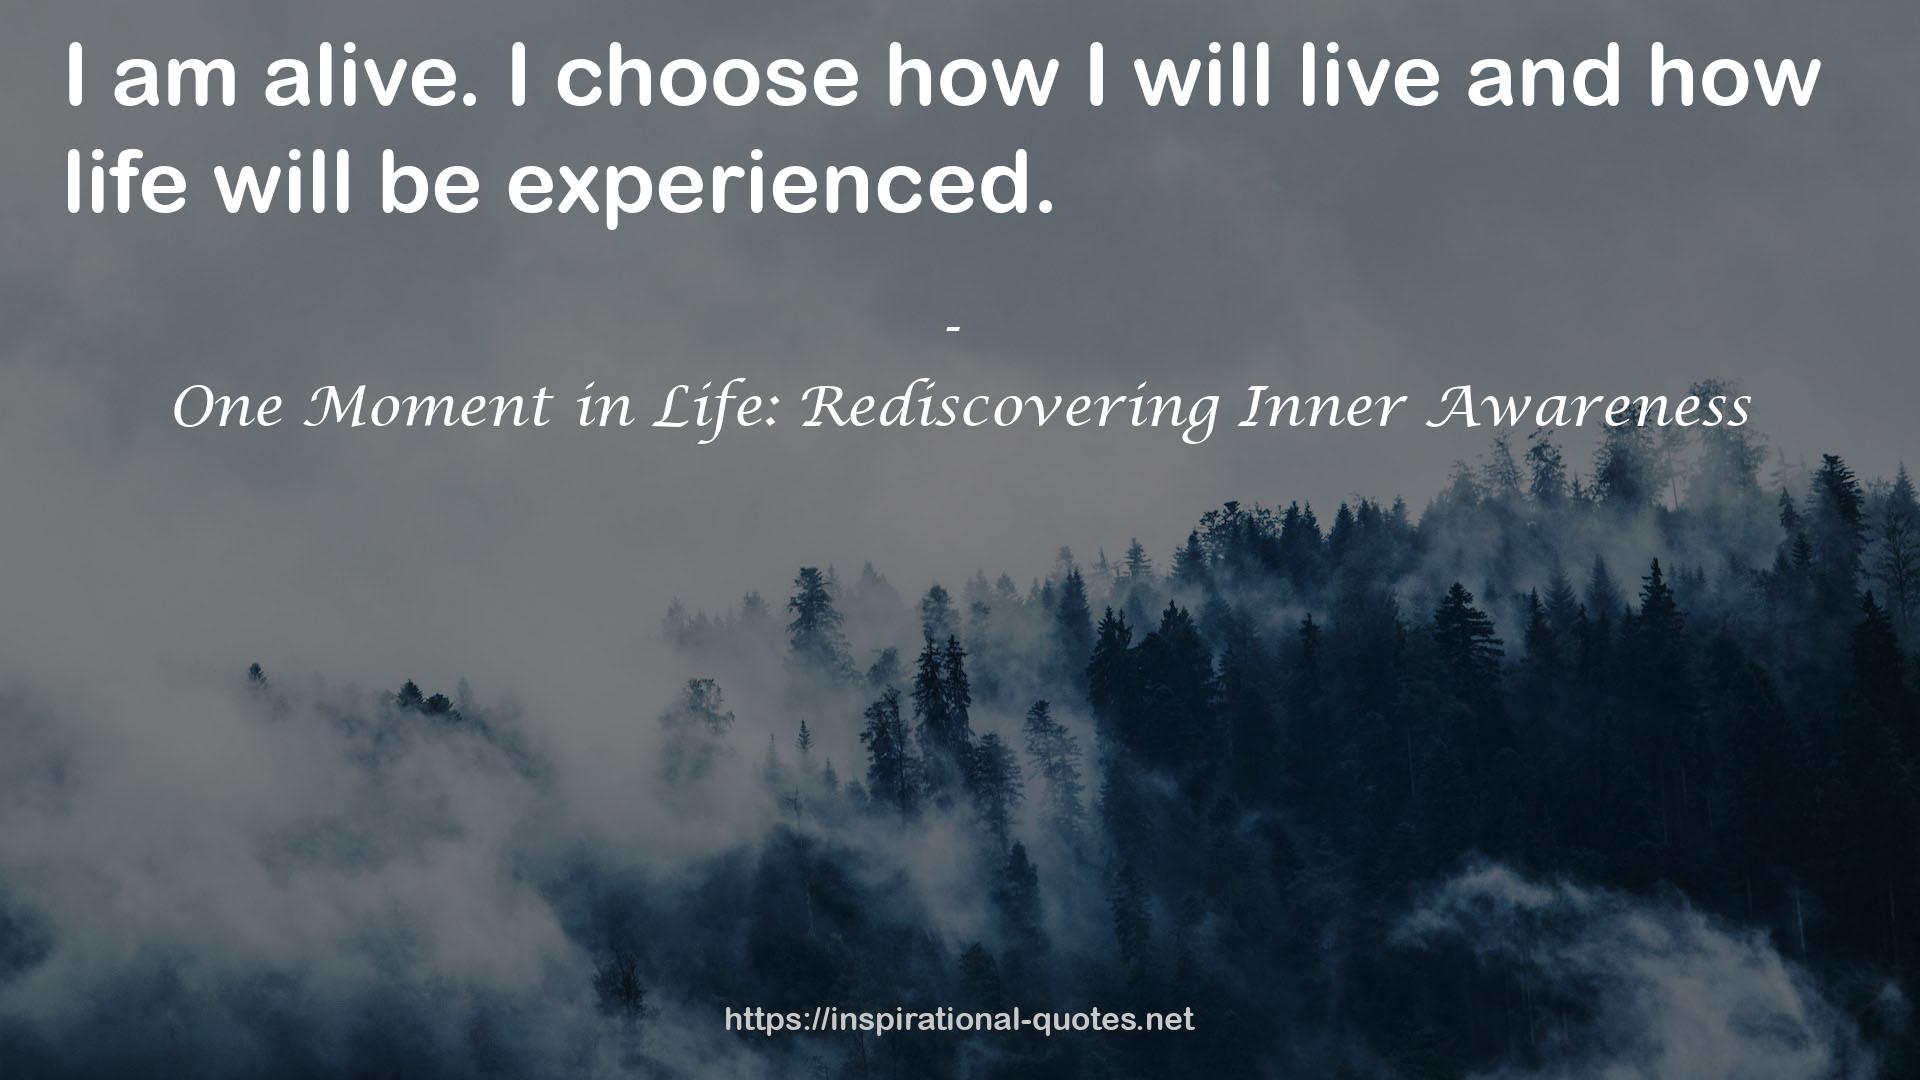 One Moment in Life: Rediscovering Inner Awareness QUOTES